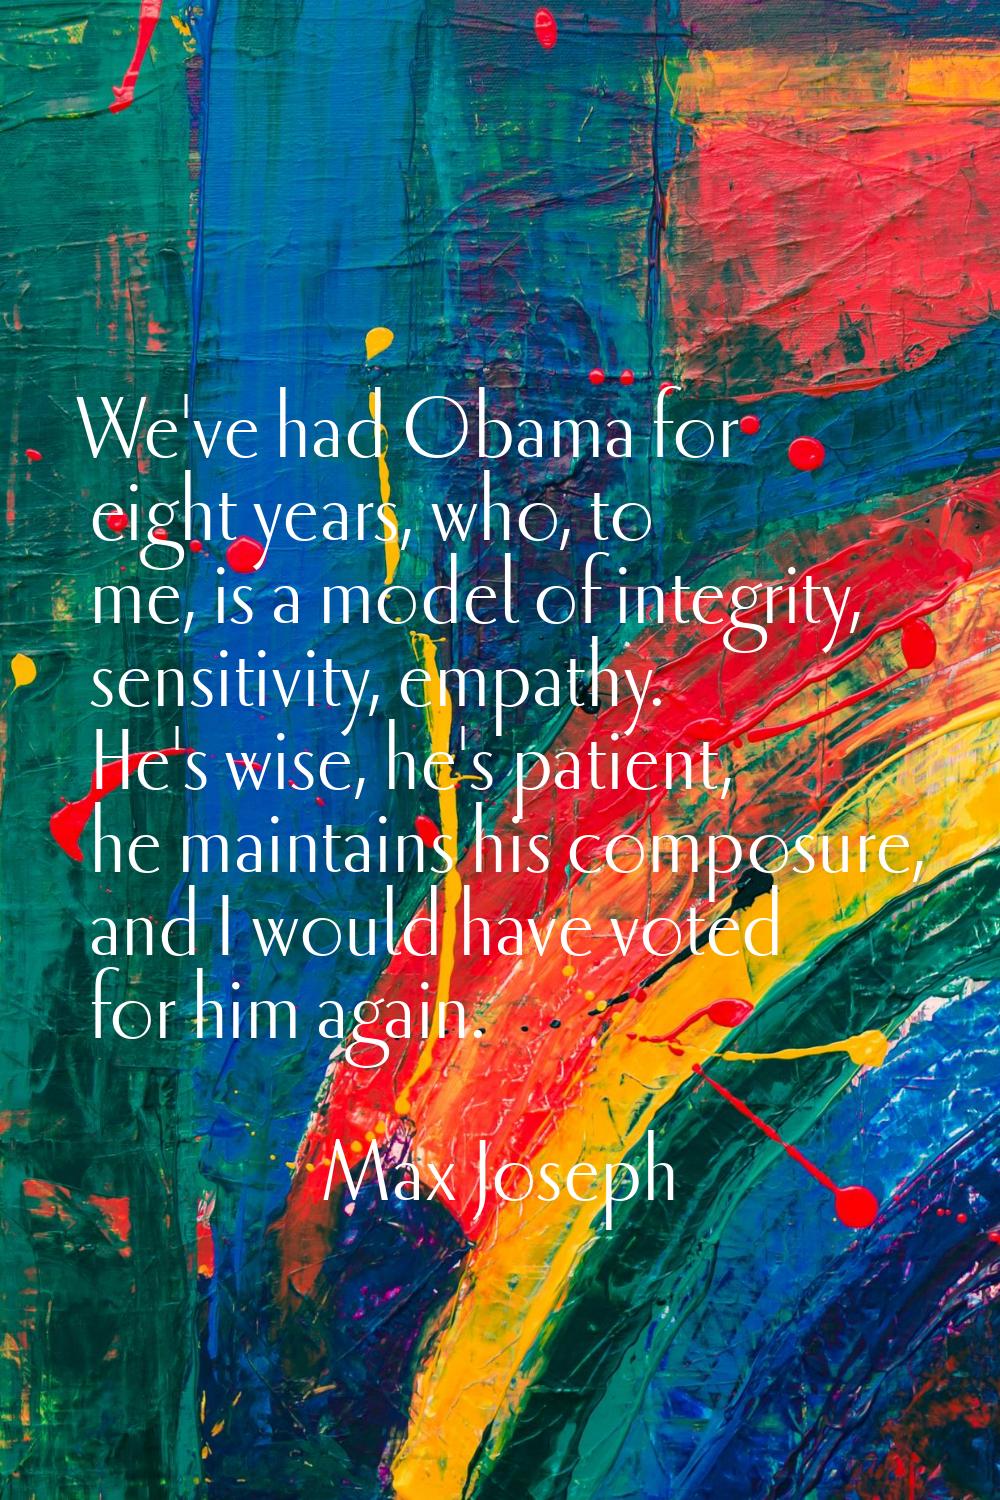 We've had Obama for eight years, who, to me, is a model of integrity, sensitivity, empathy. He's wi